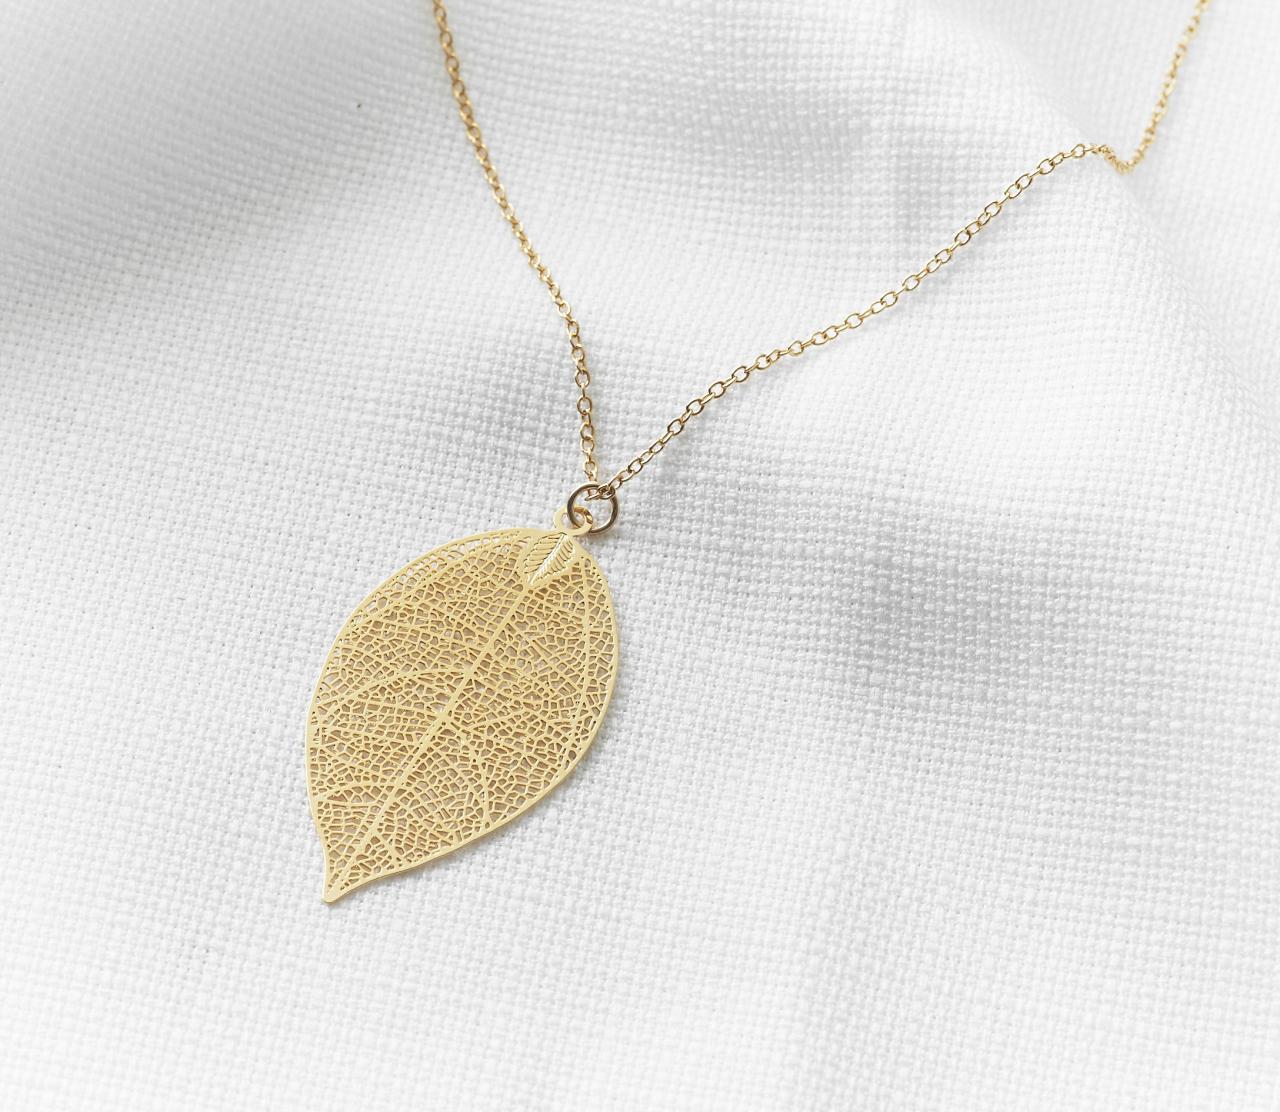 Gold Long Necklace, Gold Leaf Necklace, Filigree Leaf, Gold Leaf Pendant, Fashion Jewelry, Delicate Necklace, Birthday Gift, Gold Necklace